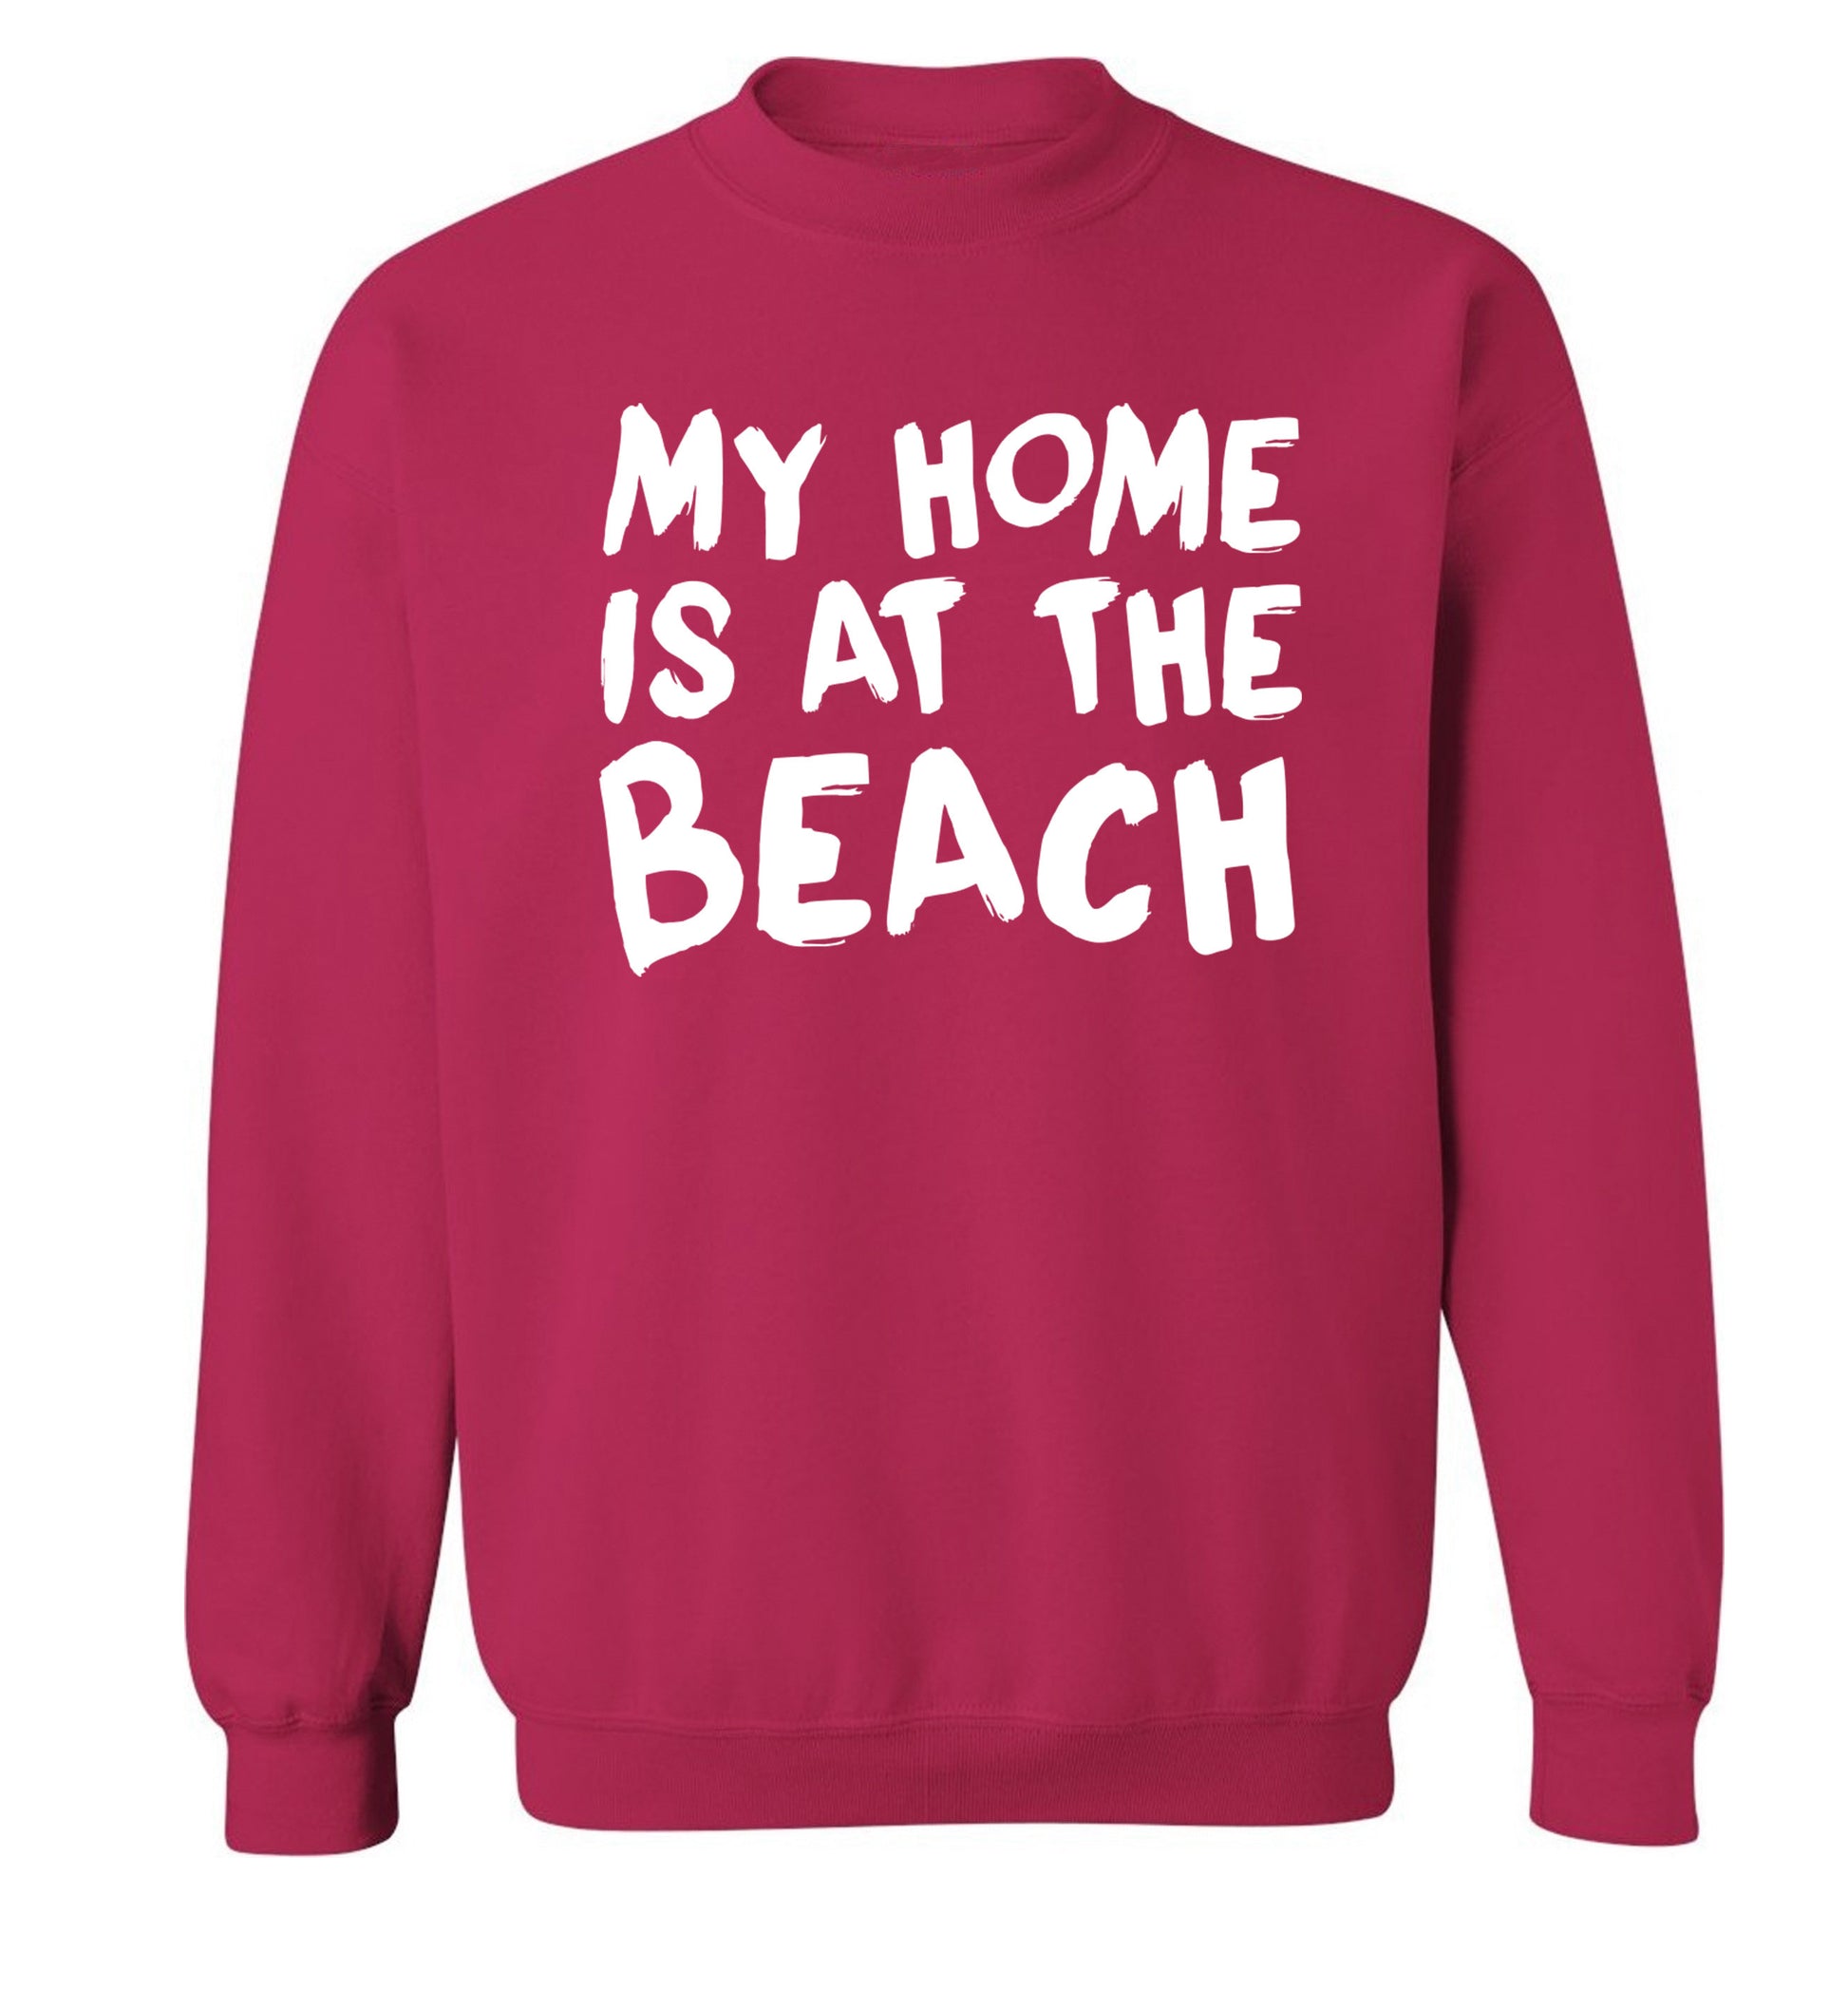 My home is at the beach Adult's unisex pink Sweater 2XL